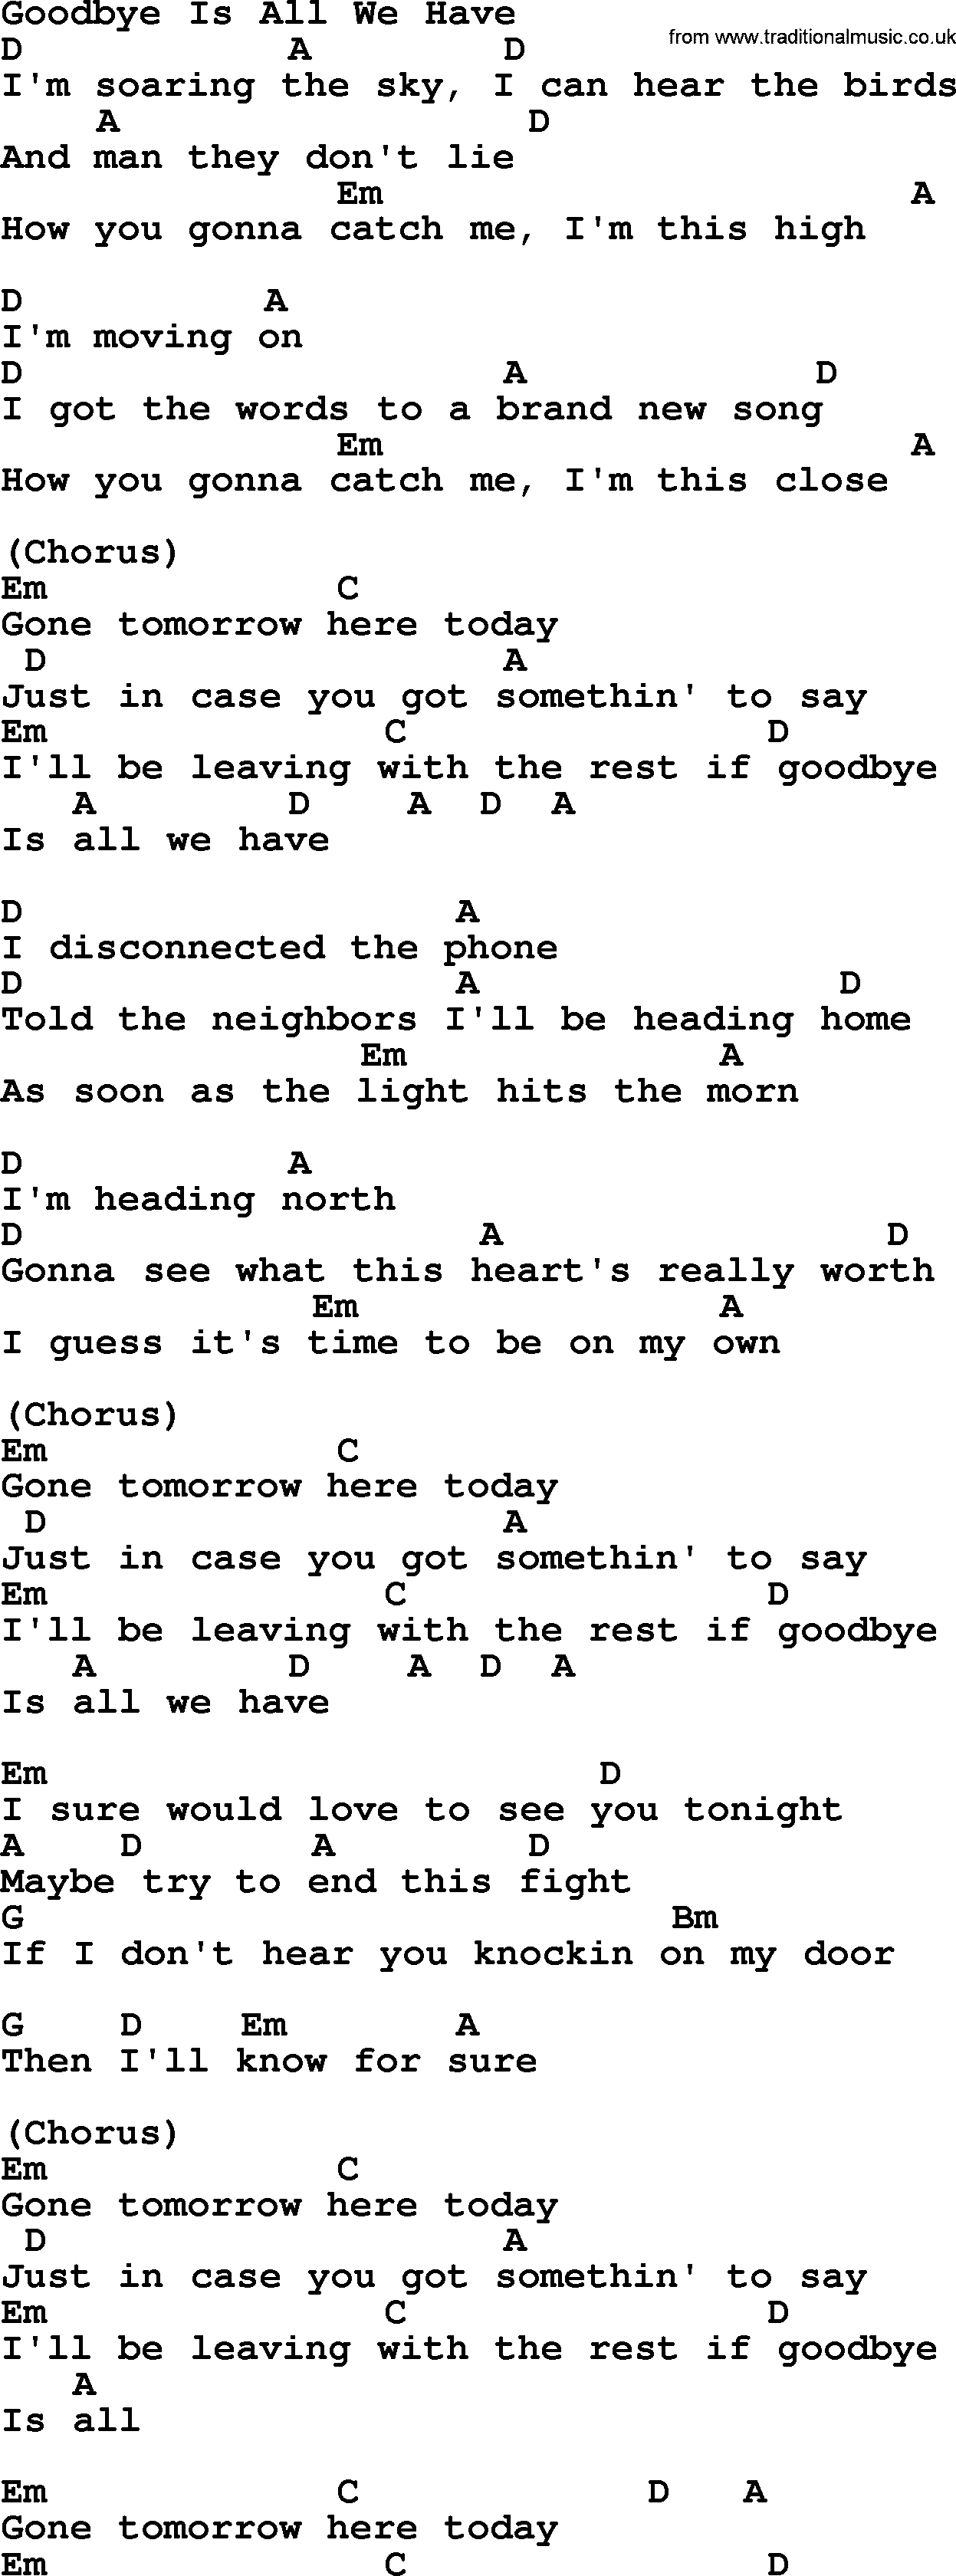 Bluegrass song: Goodbye Is All We Have, lyrics and chords